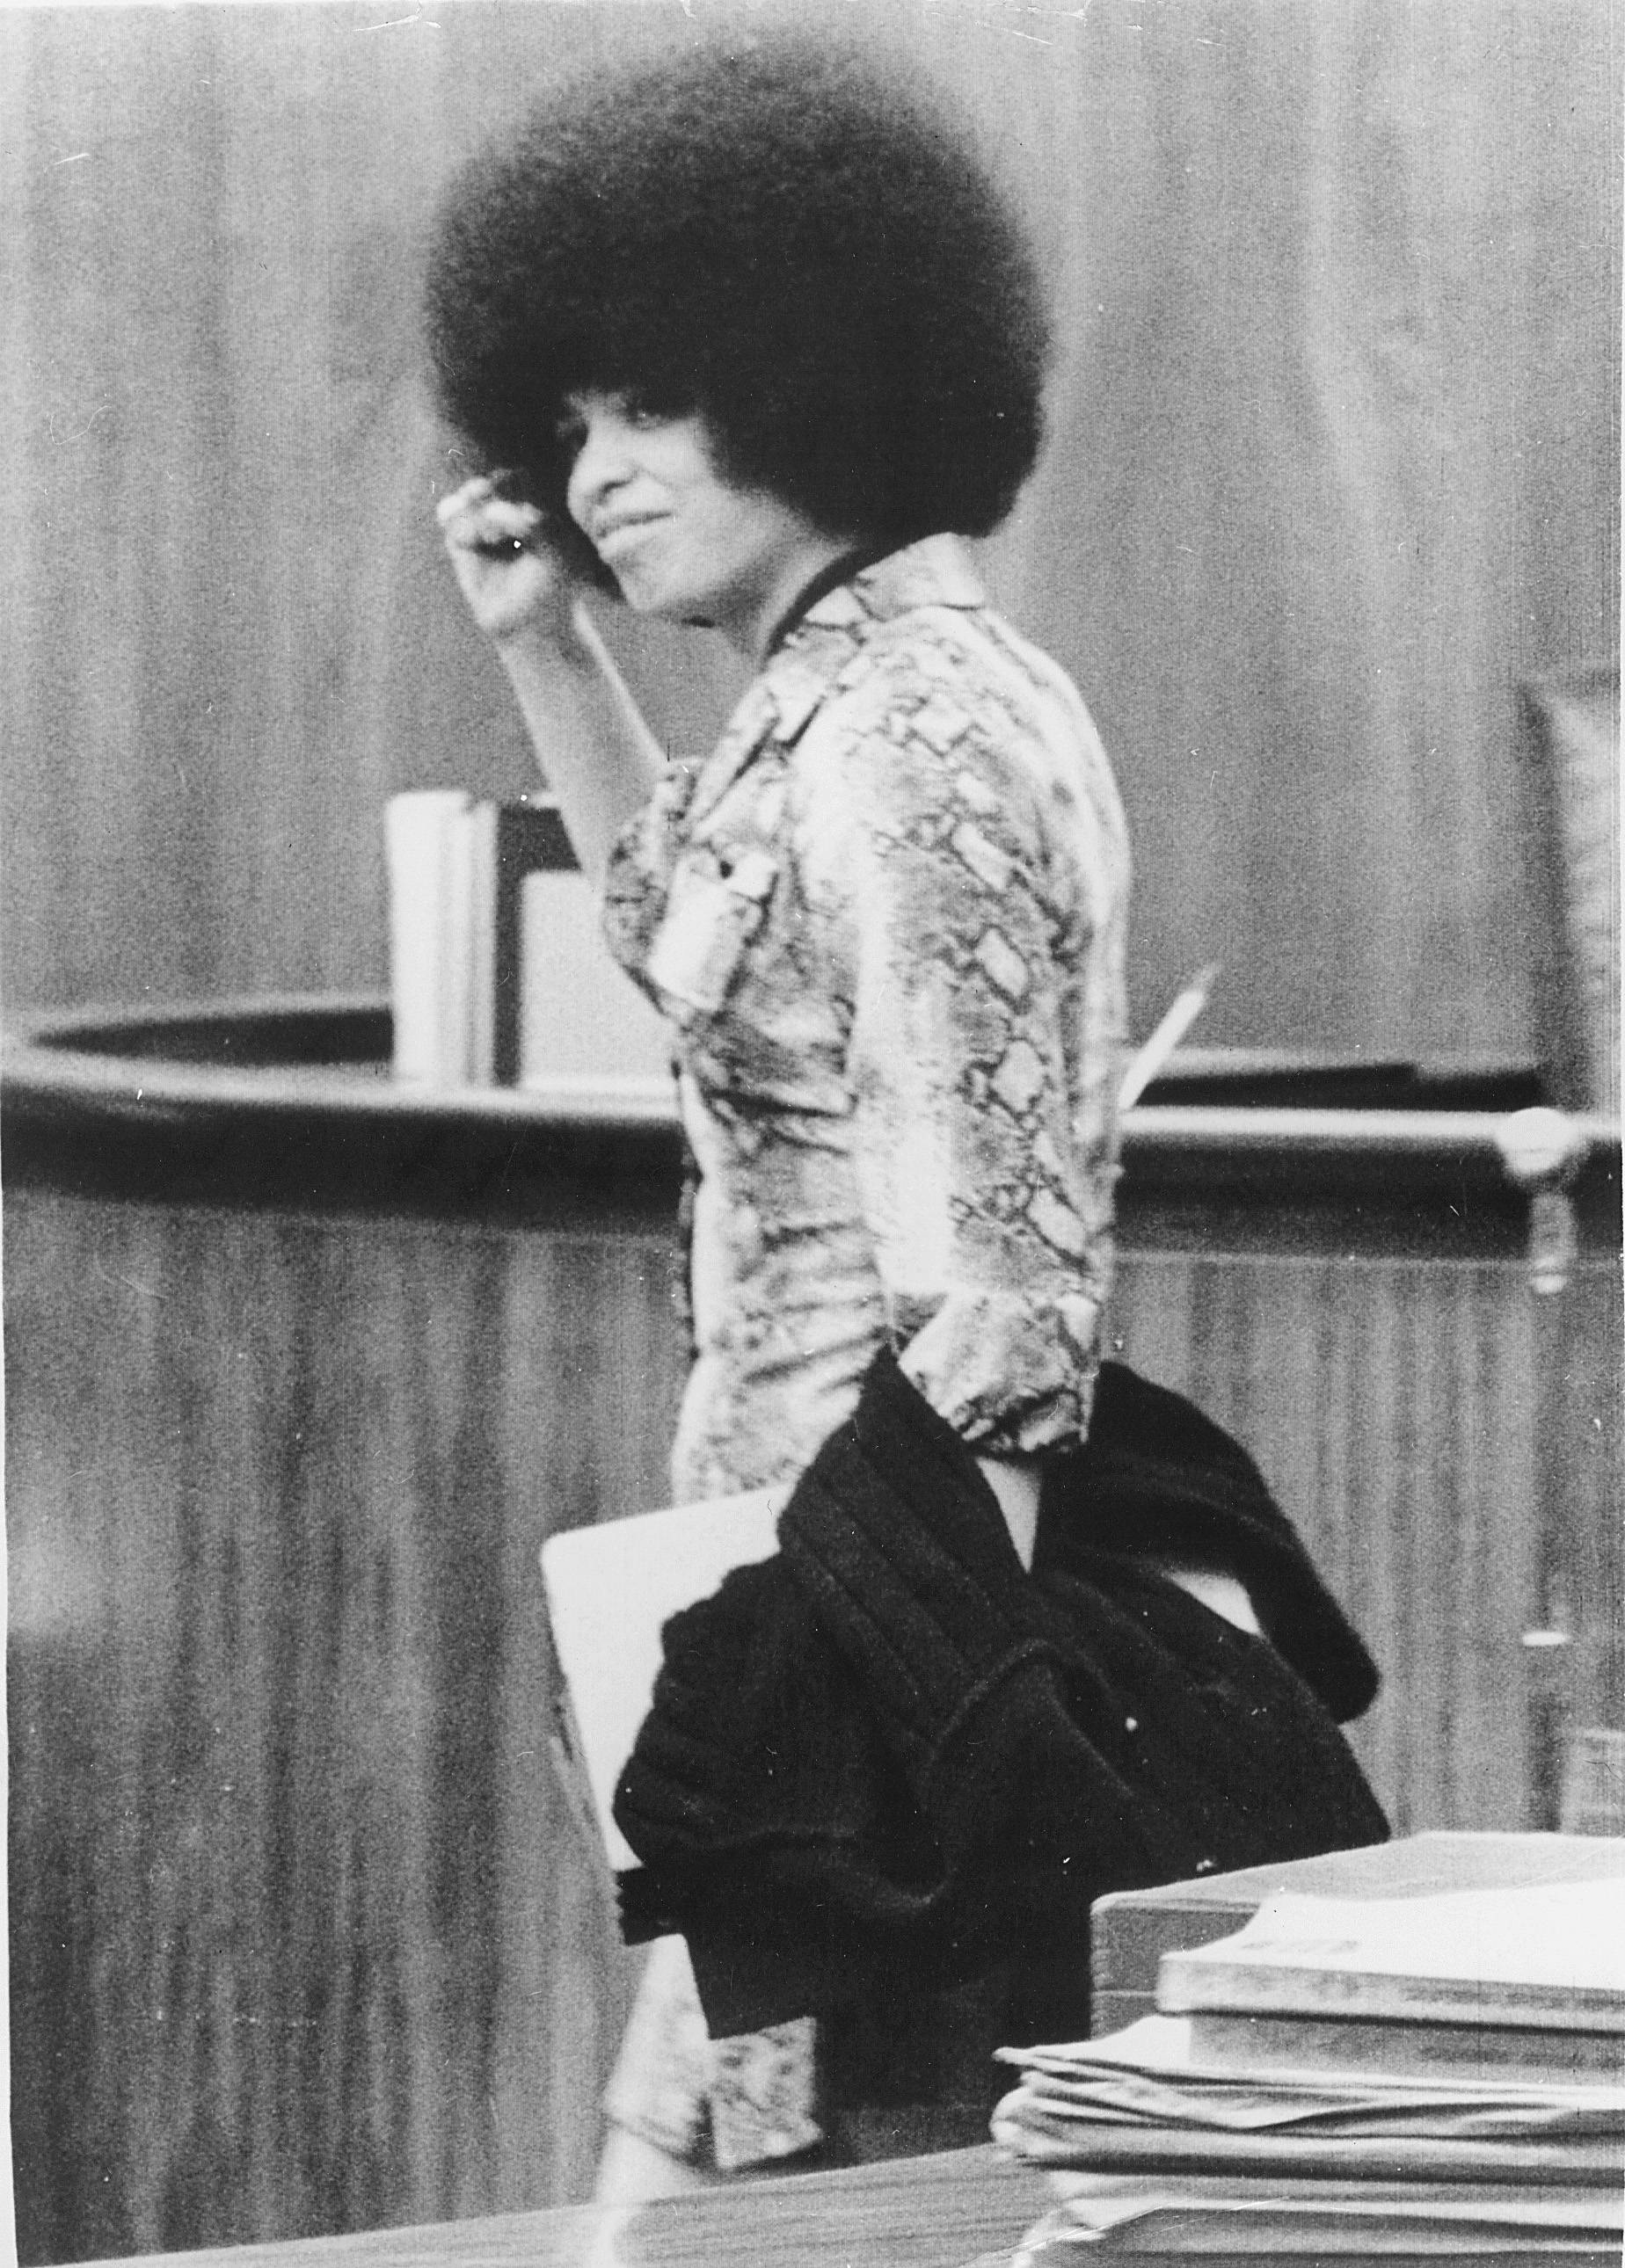 Black Power Originator - Angela Davis, Black power icon, professor and role model. Find out more about the woman who inspired millions to galvinize towards peace, justice and equality.&nbsp;(Photo: UPI Photo/Landov)